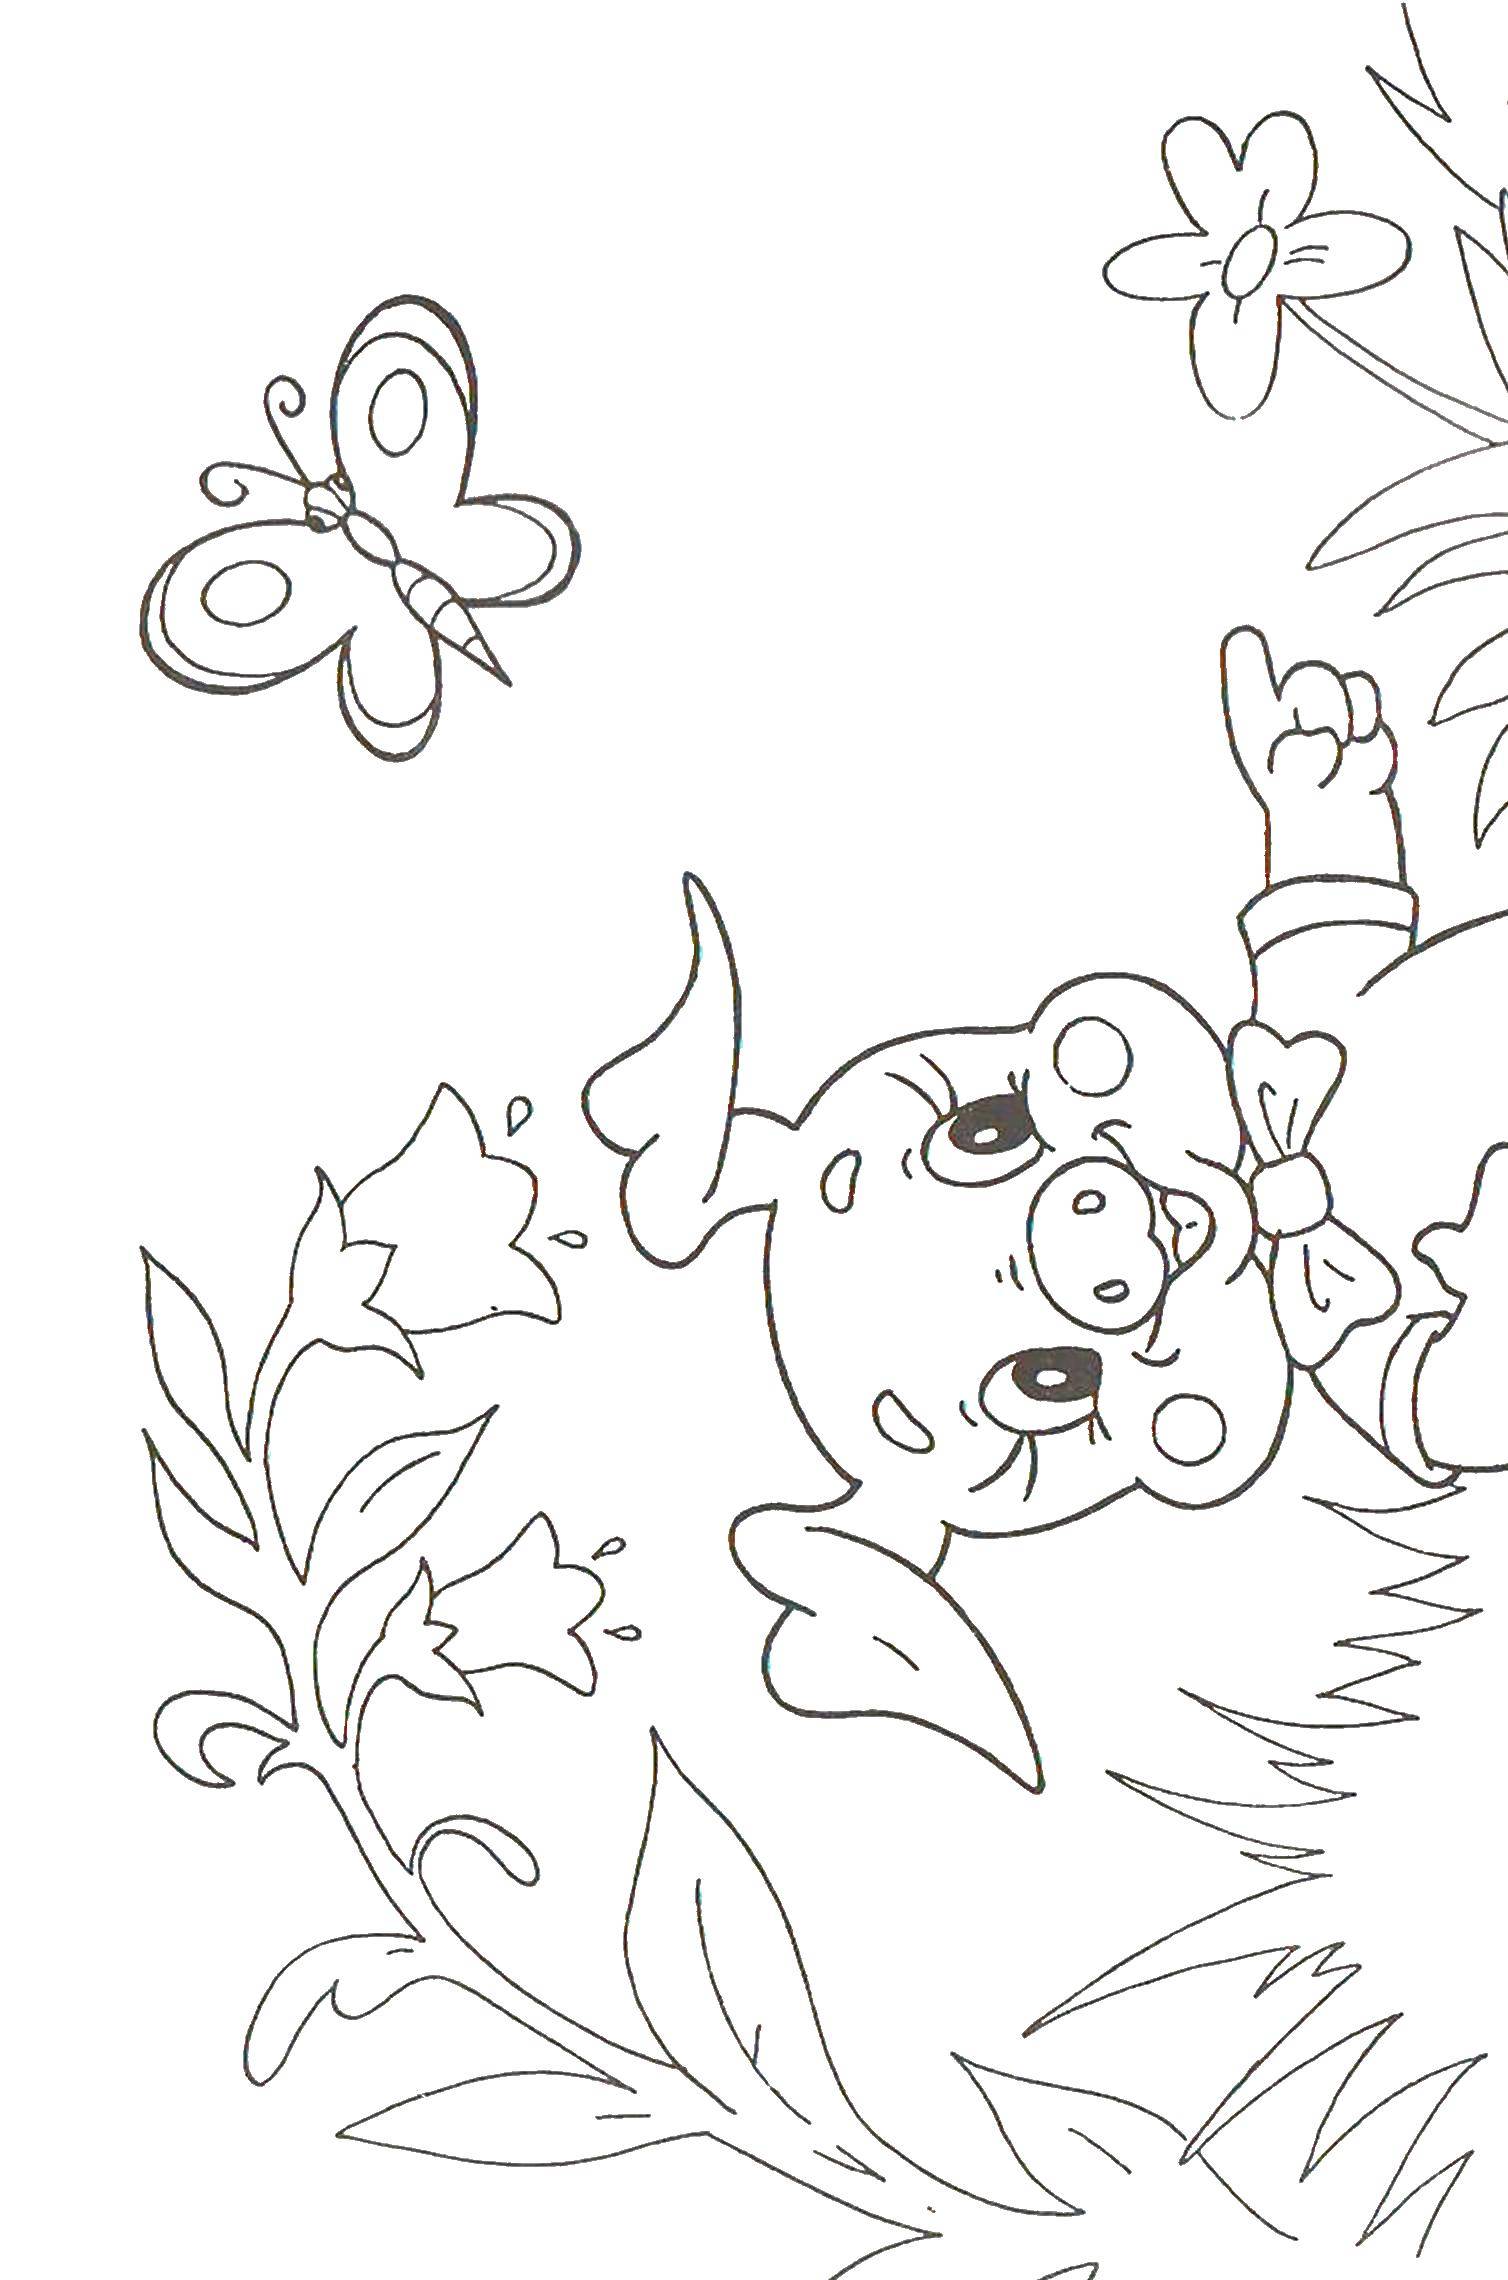 Coloring Pig catches a butterfly. Category baby. Tags:  pig, wolf.